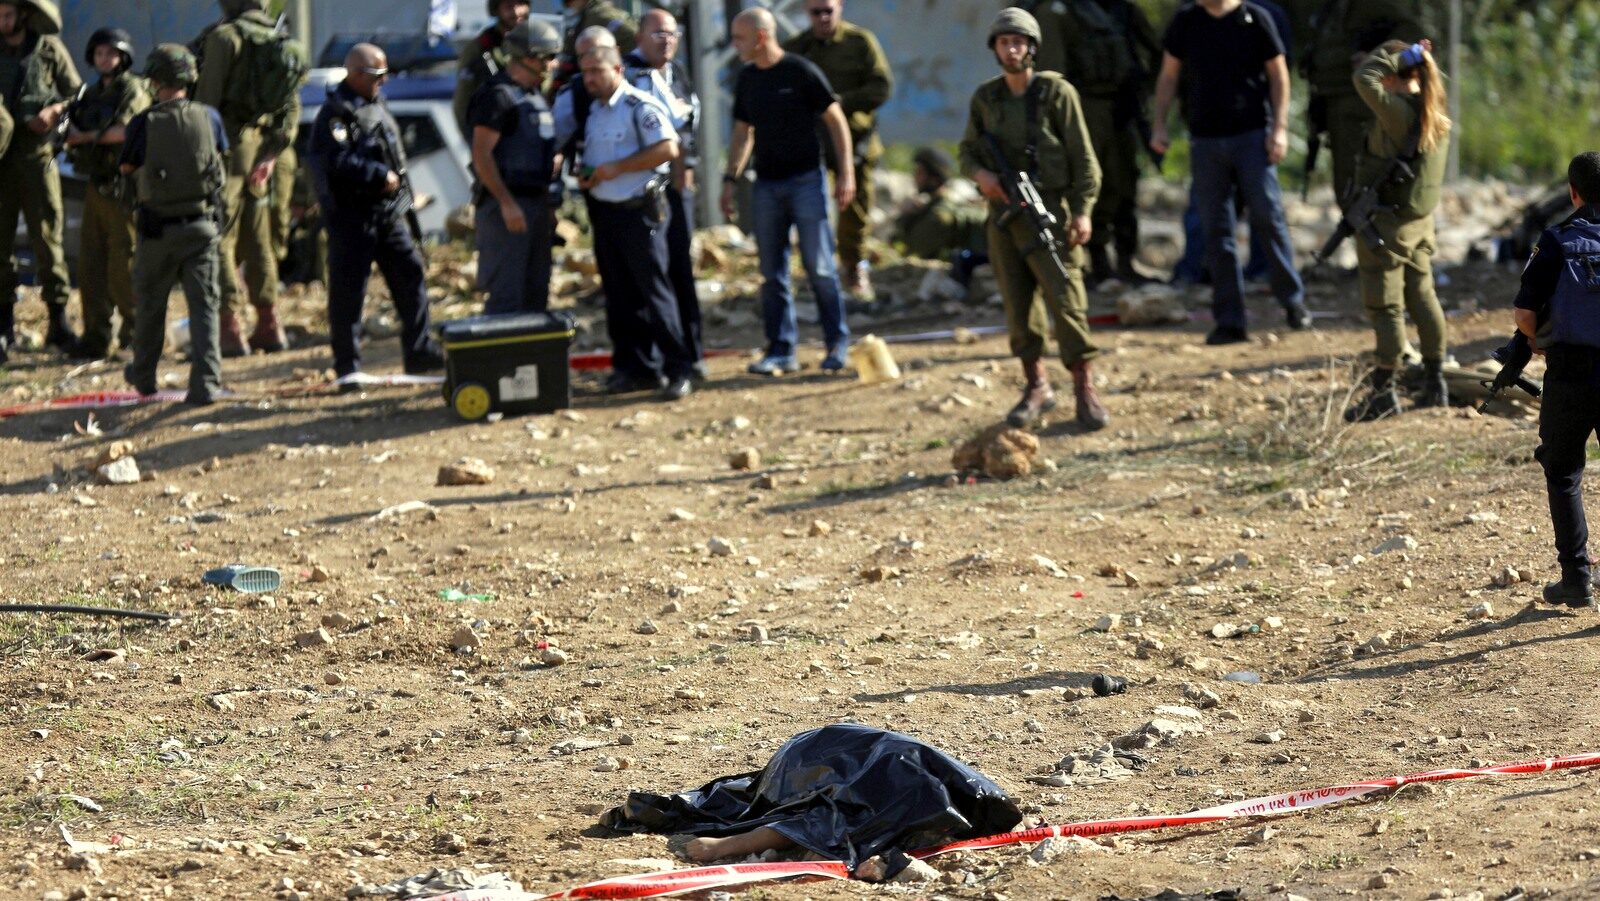 Israeli soldiers stand near the body of 27-year-old Palestinian Fadi Froukh, in the Beit Einun junction east of the West Bank city of Hebron, Sunday, Nov 1, 2015. (AP/Nasser Shiyoukhi)